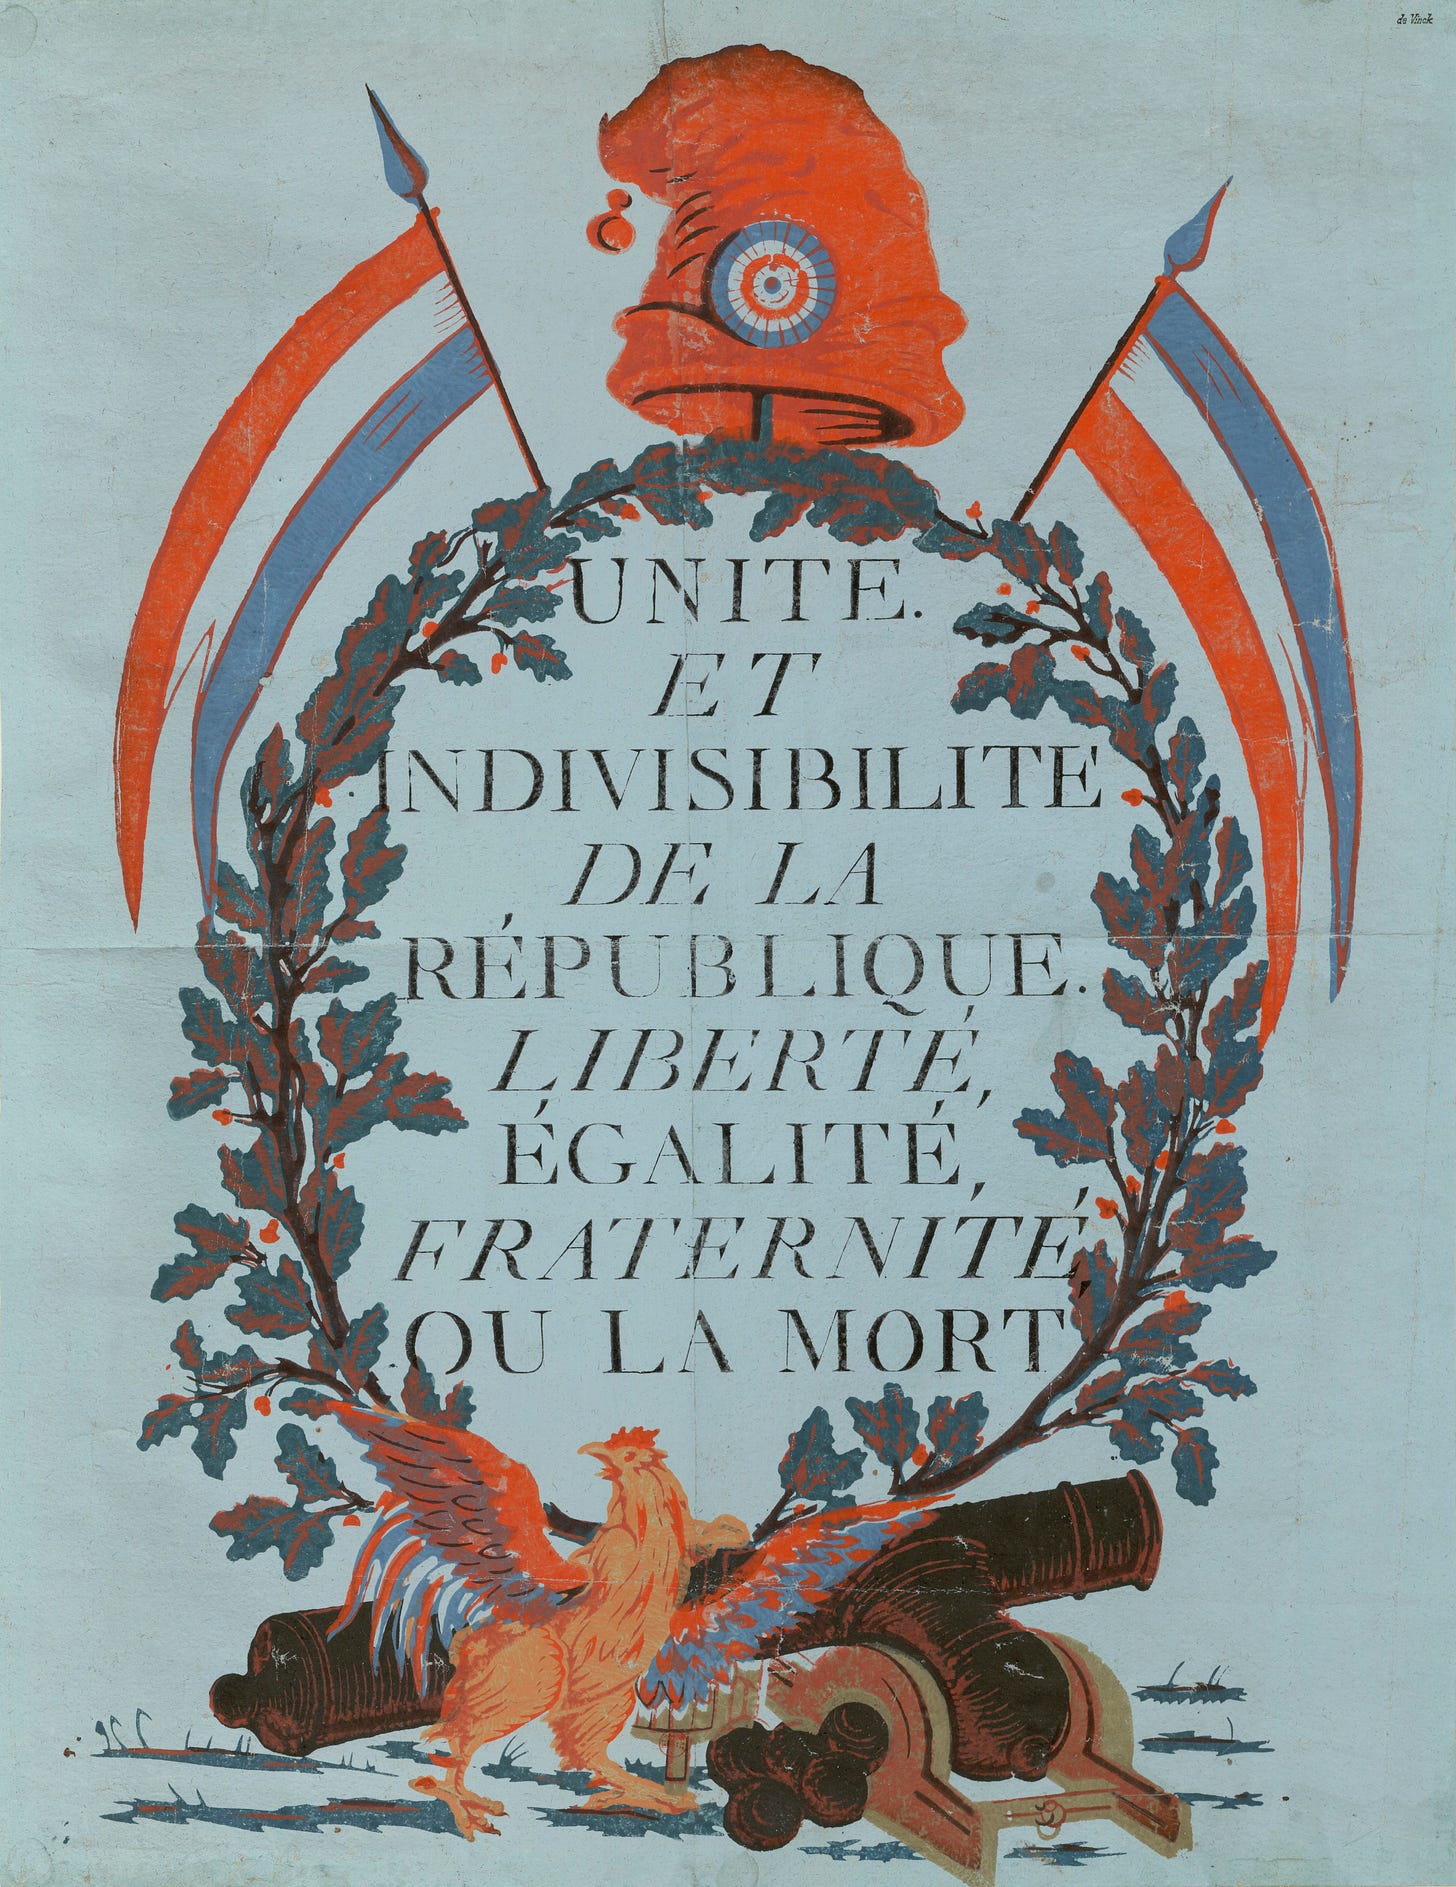 Propaganda print for the First French Republic, 1793